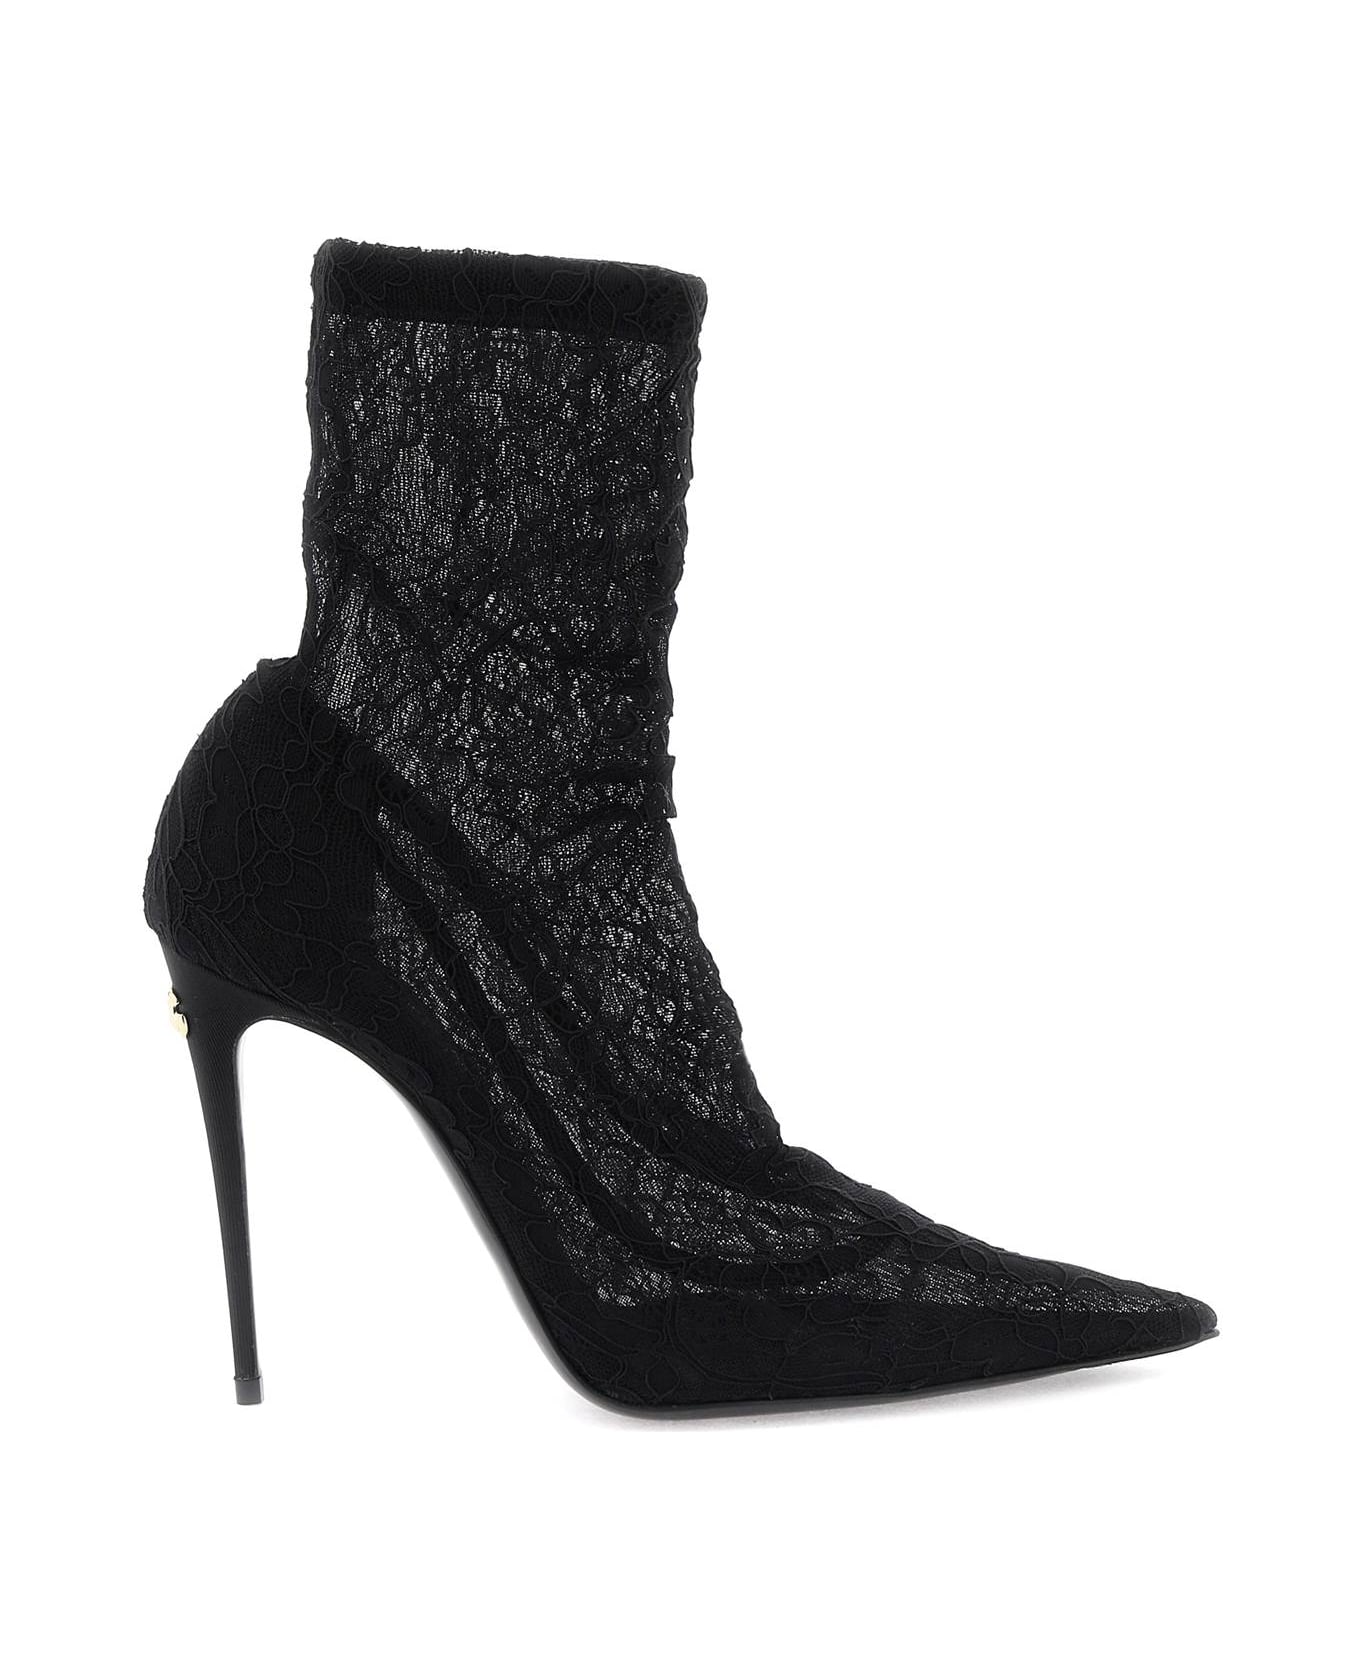 Dolce & Gabbana Lace Ankle Boots - Black ブーツ